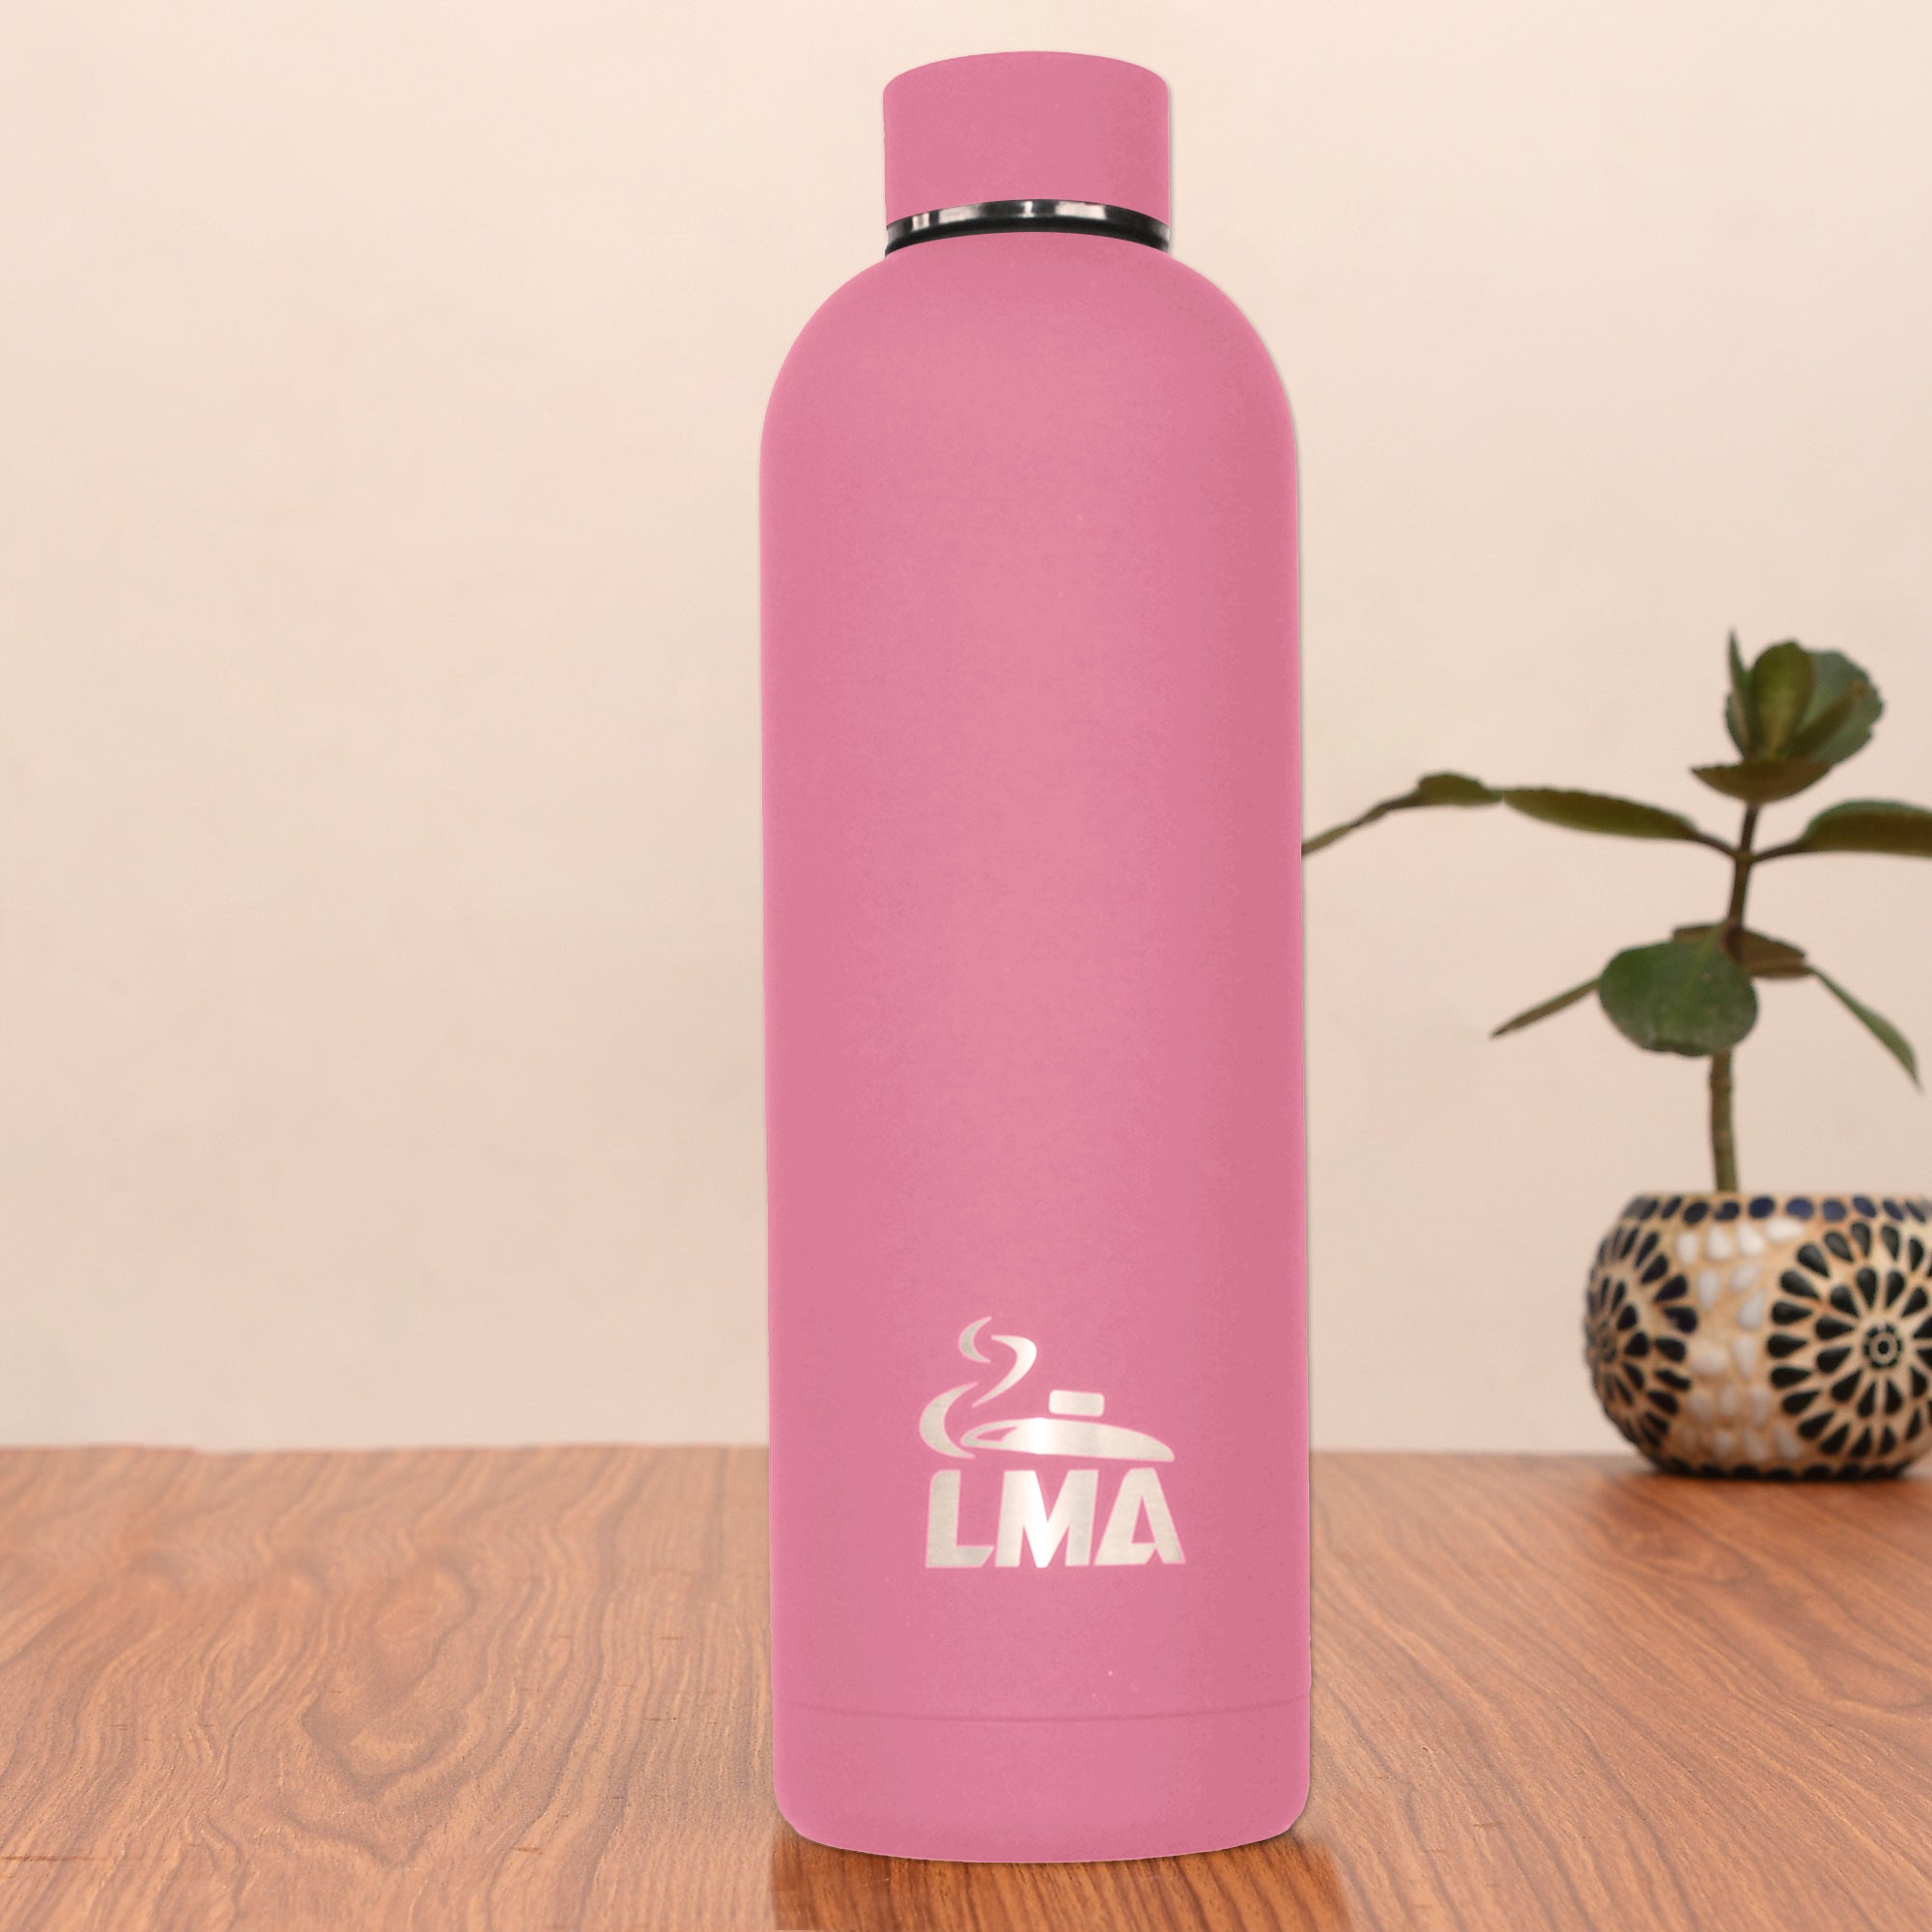 LMA 750ml Rubber-Coated Double Wall Stainless Steel Water Bottle